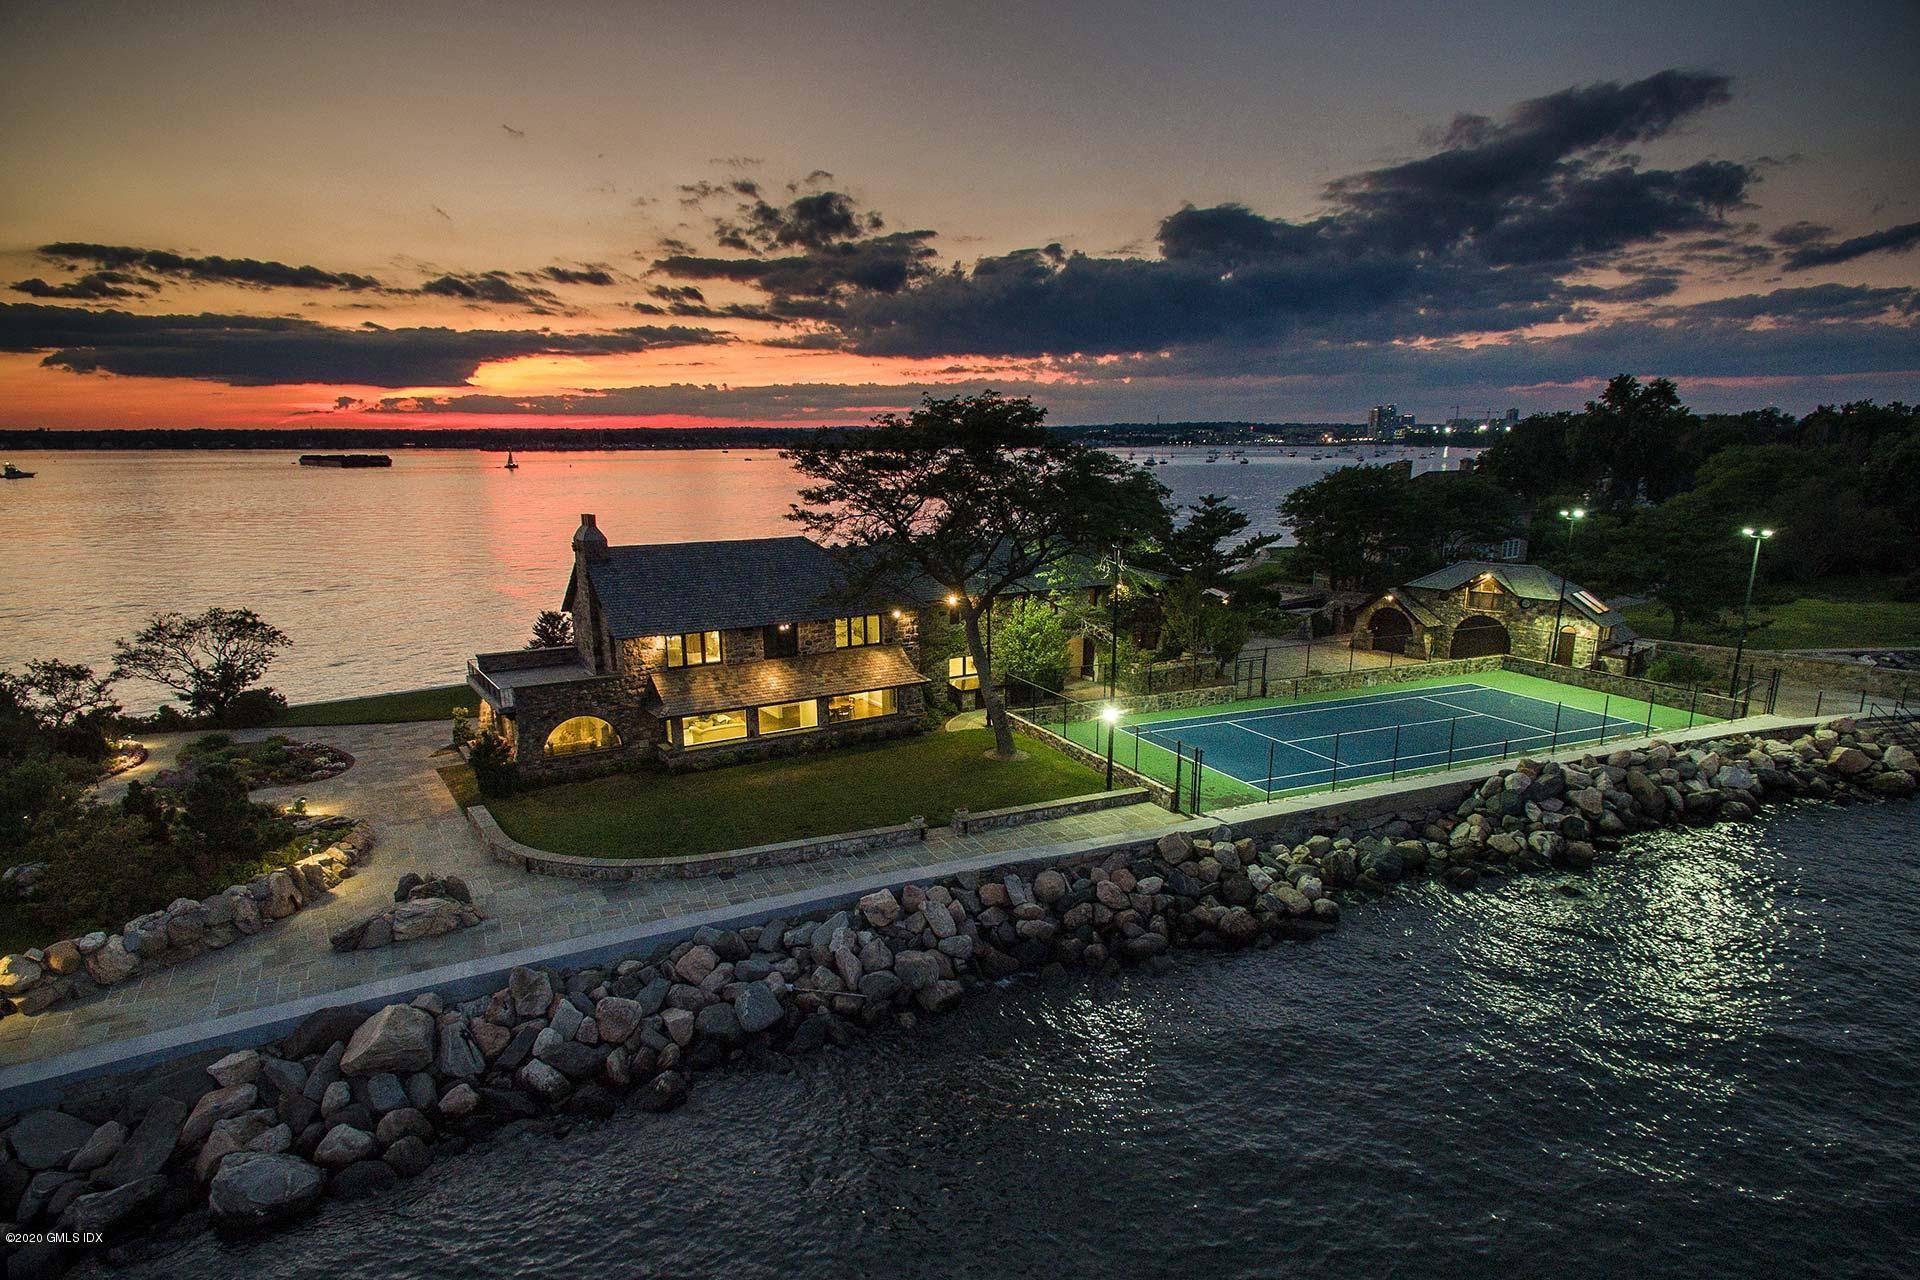 Surrounded by Long Island Sound on 3 sides, this 5, 497 SF waterfront compound has defined the southern tip of Shippan Point for over a century.